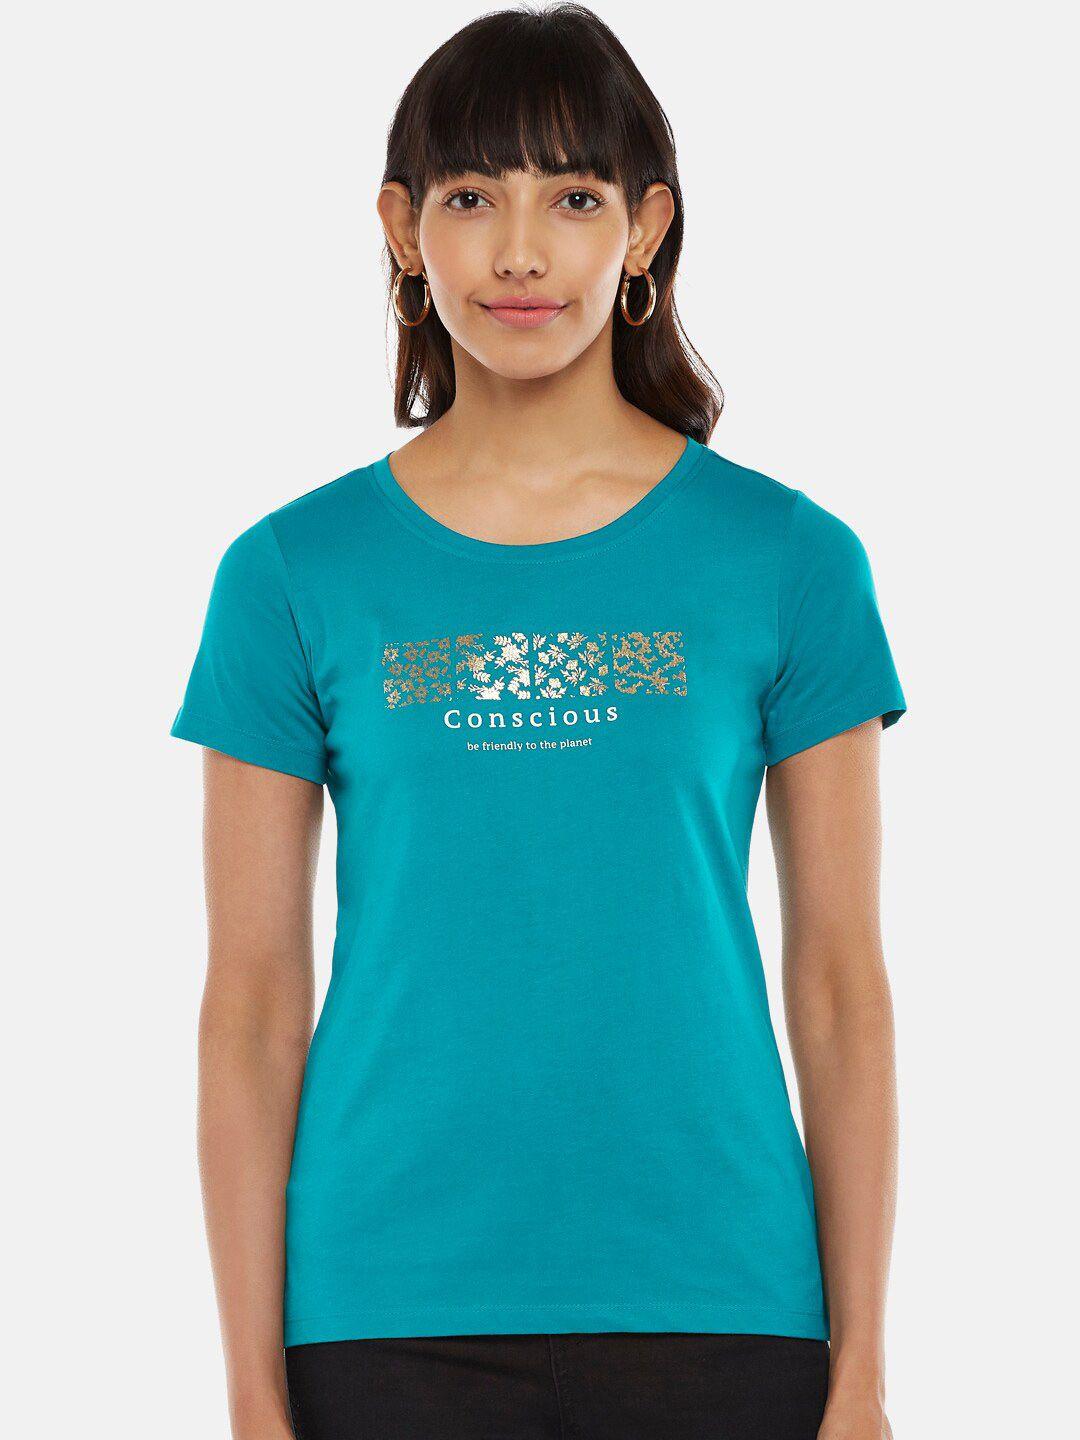 honey by pantaloons women teal typography printed t-shirt